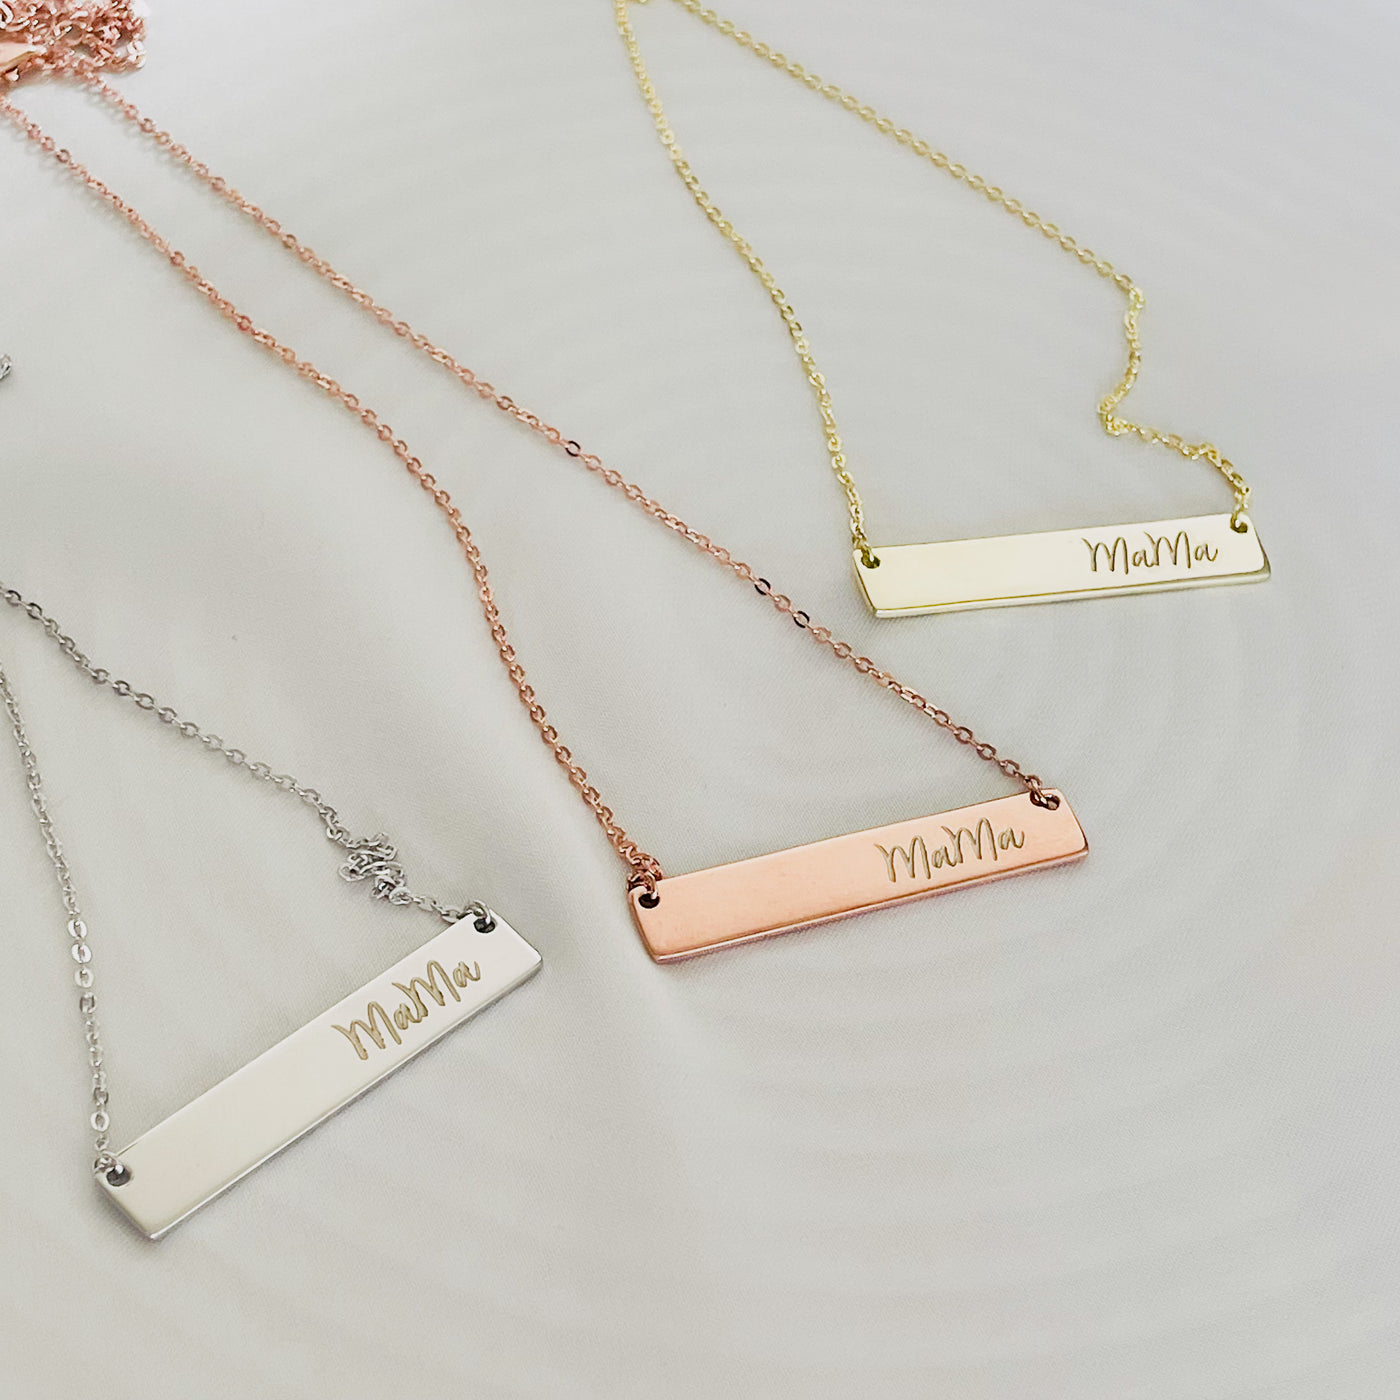 PERSONALIZED MAMA NAME BAR NECKLACE - SILVER, GOLD & ROSE GOLD | forever imprint jewellery